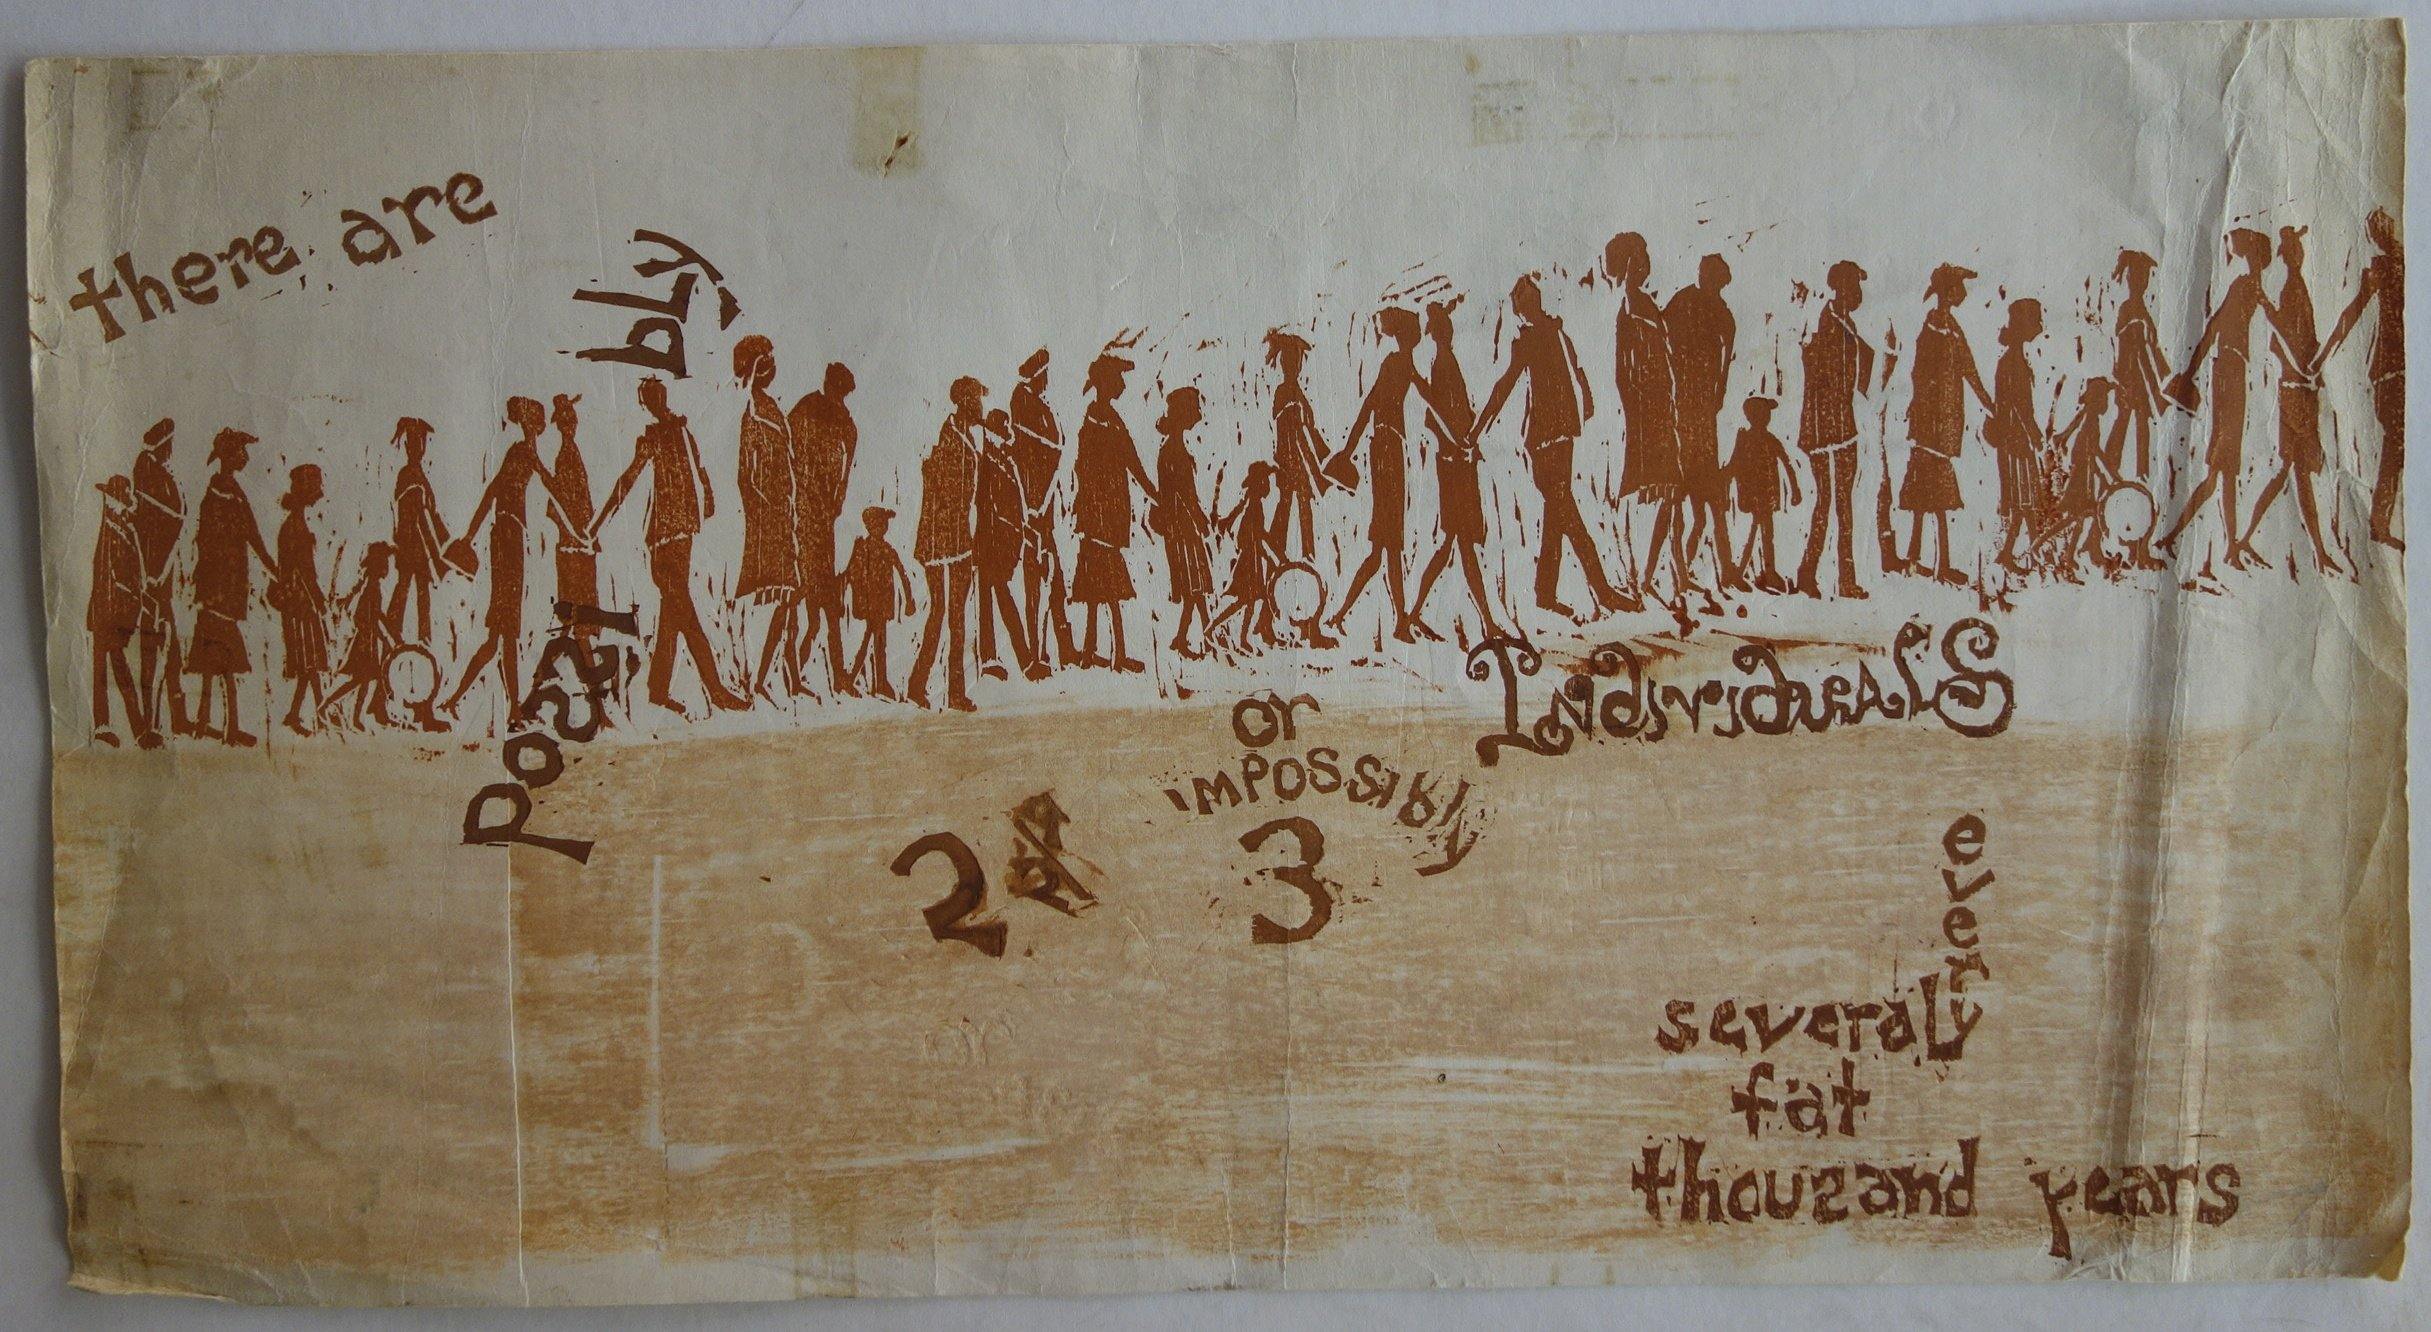 half of page brown and half white.33 shadow image men woman and children walking across page